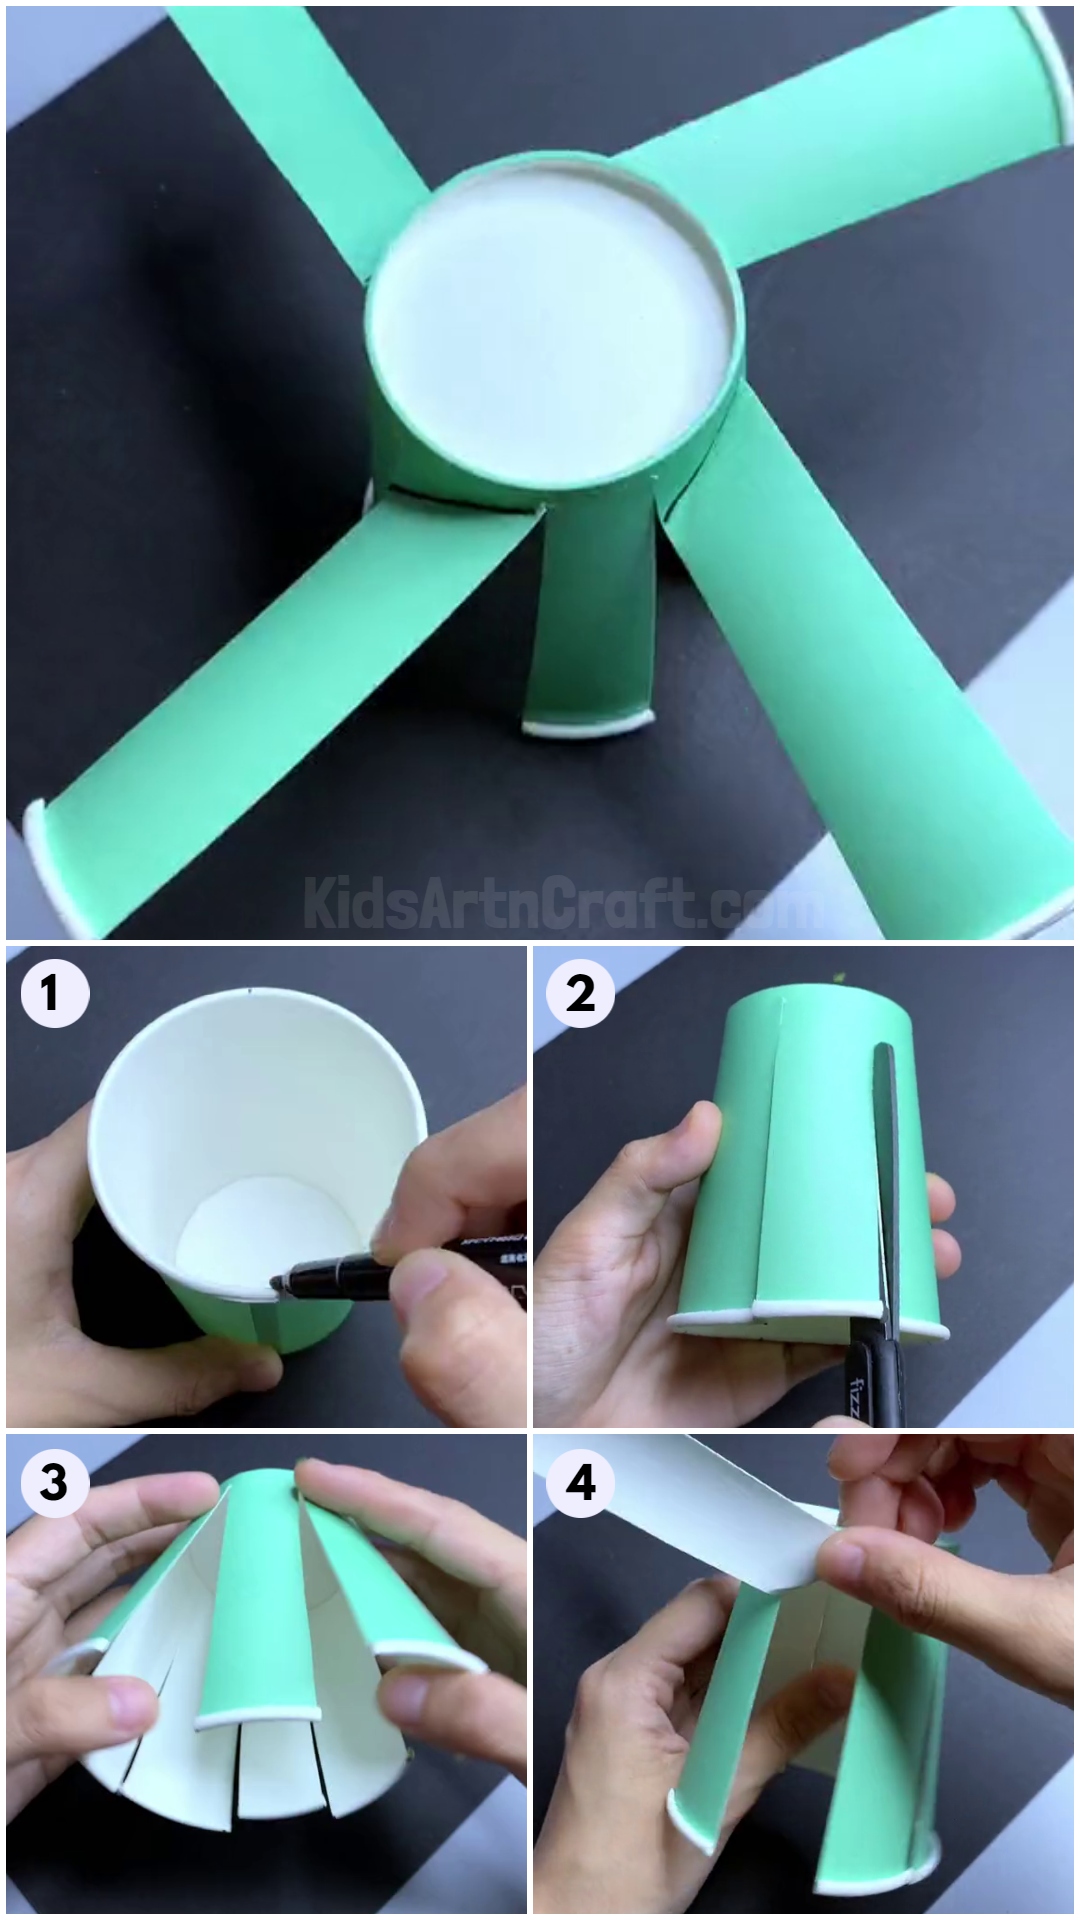 Fan Shaped Paper Cup Craft Activity For Kids - Kids Art & Craft